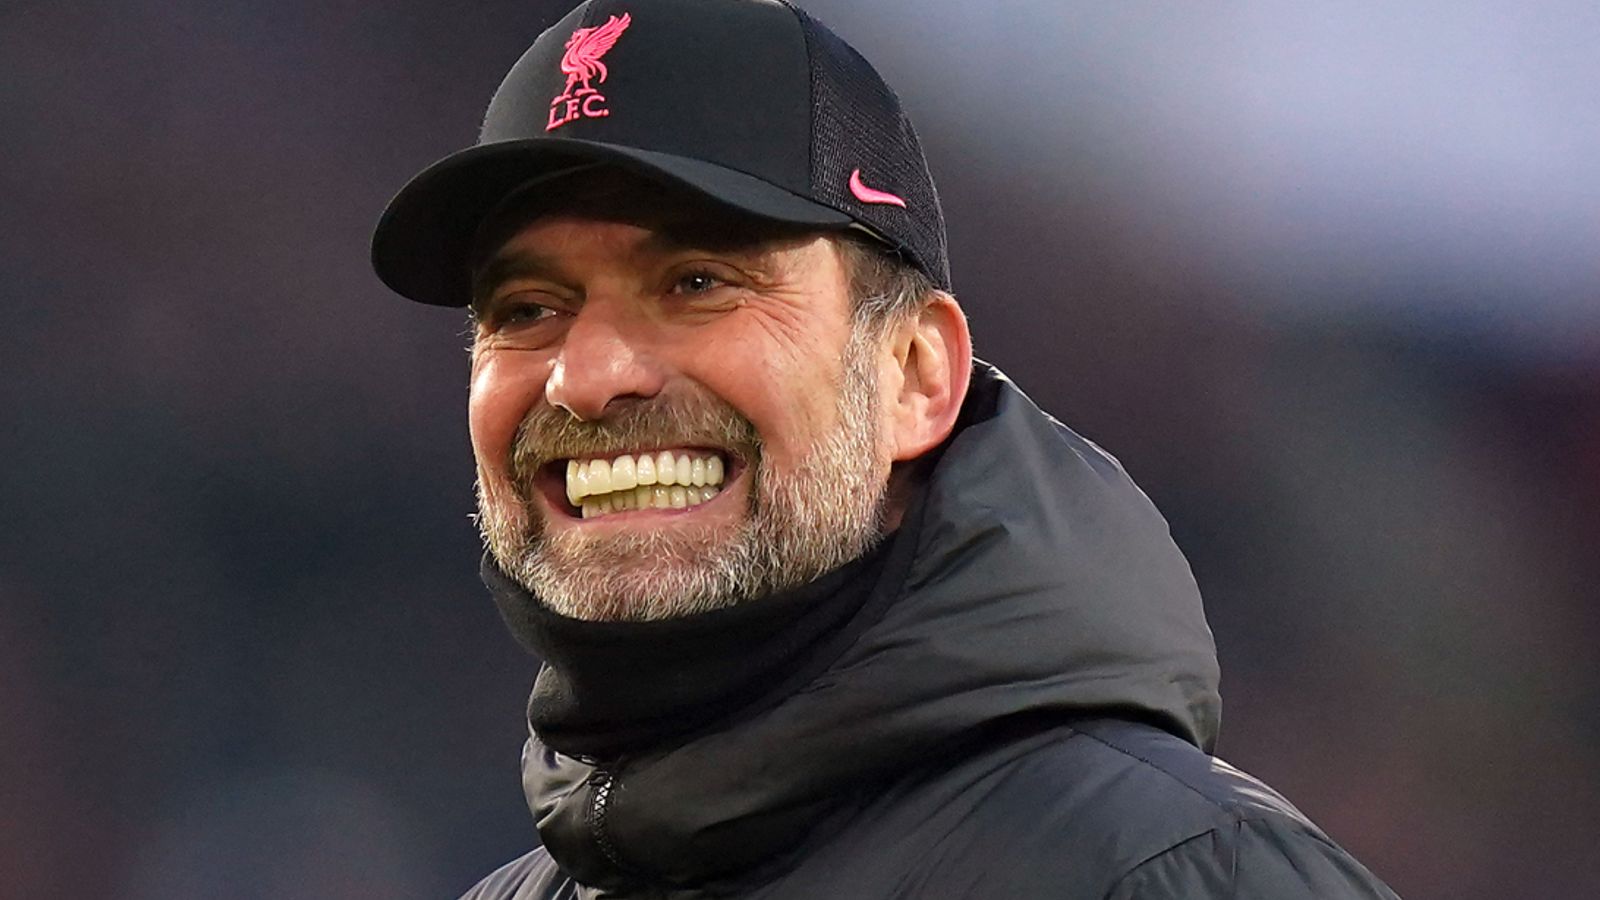 Jurgen Klopp responds to Pep Guardiola’s reaction by saying his city is not behind the title challenge |  football news